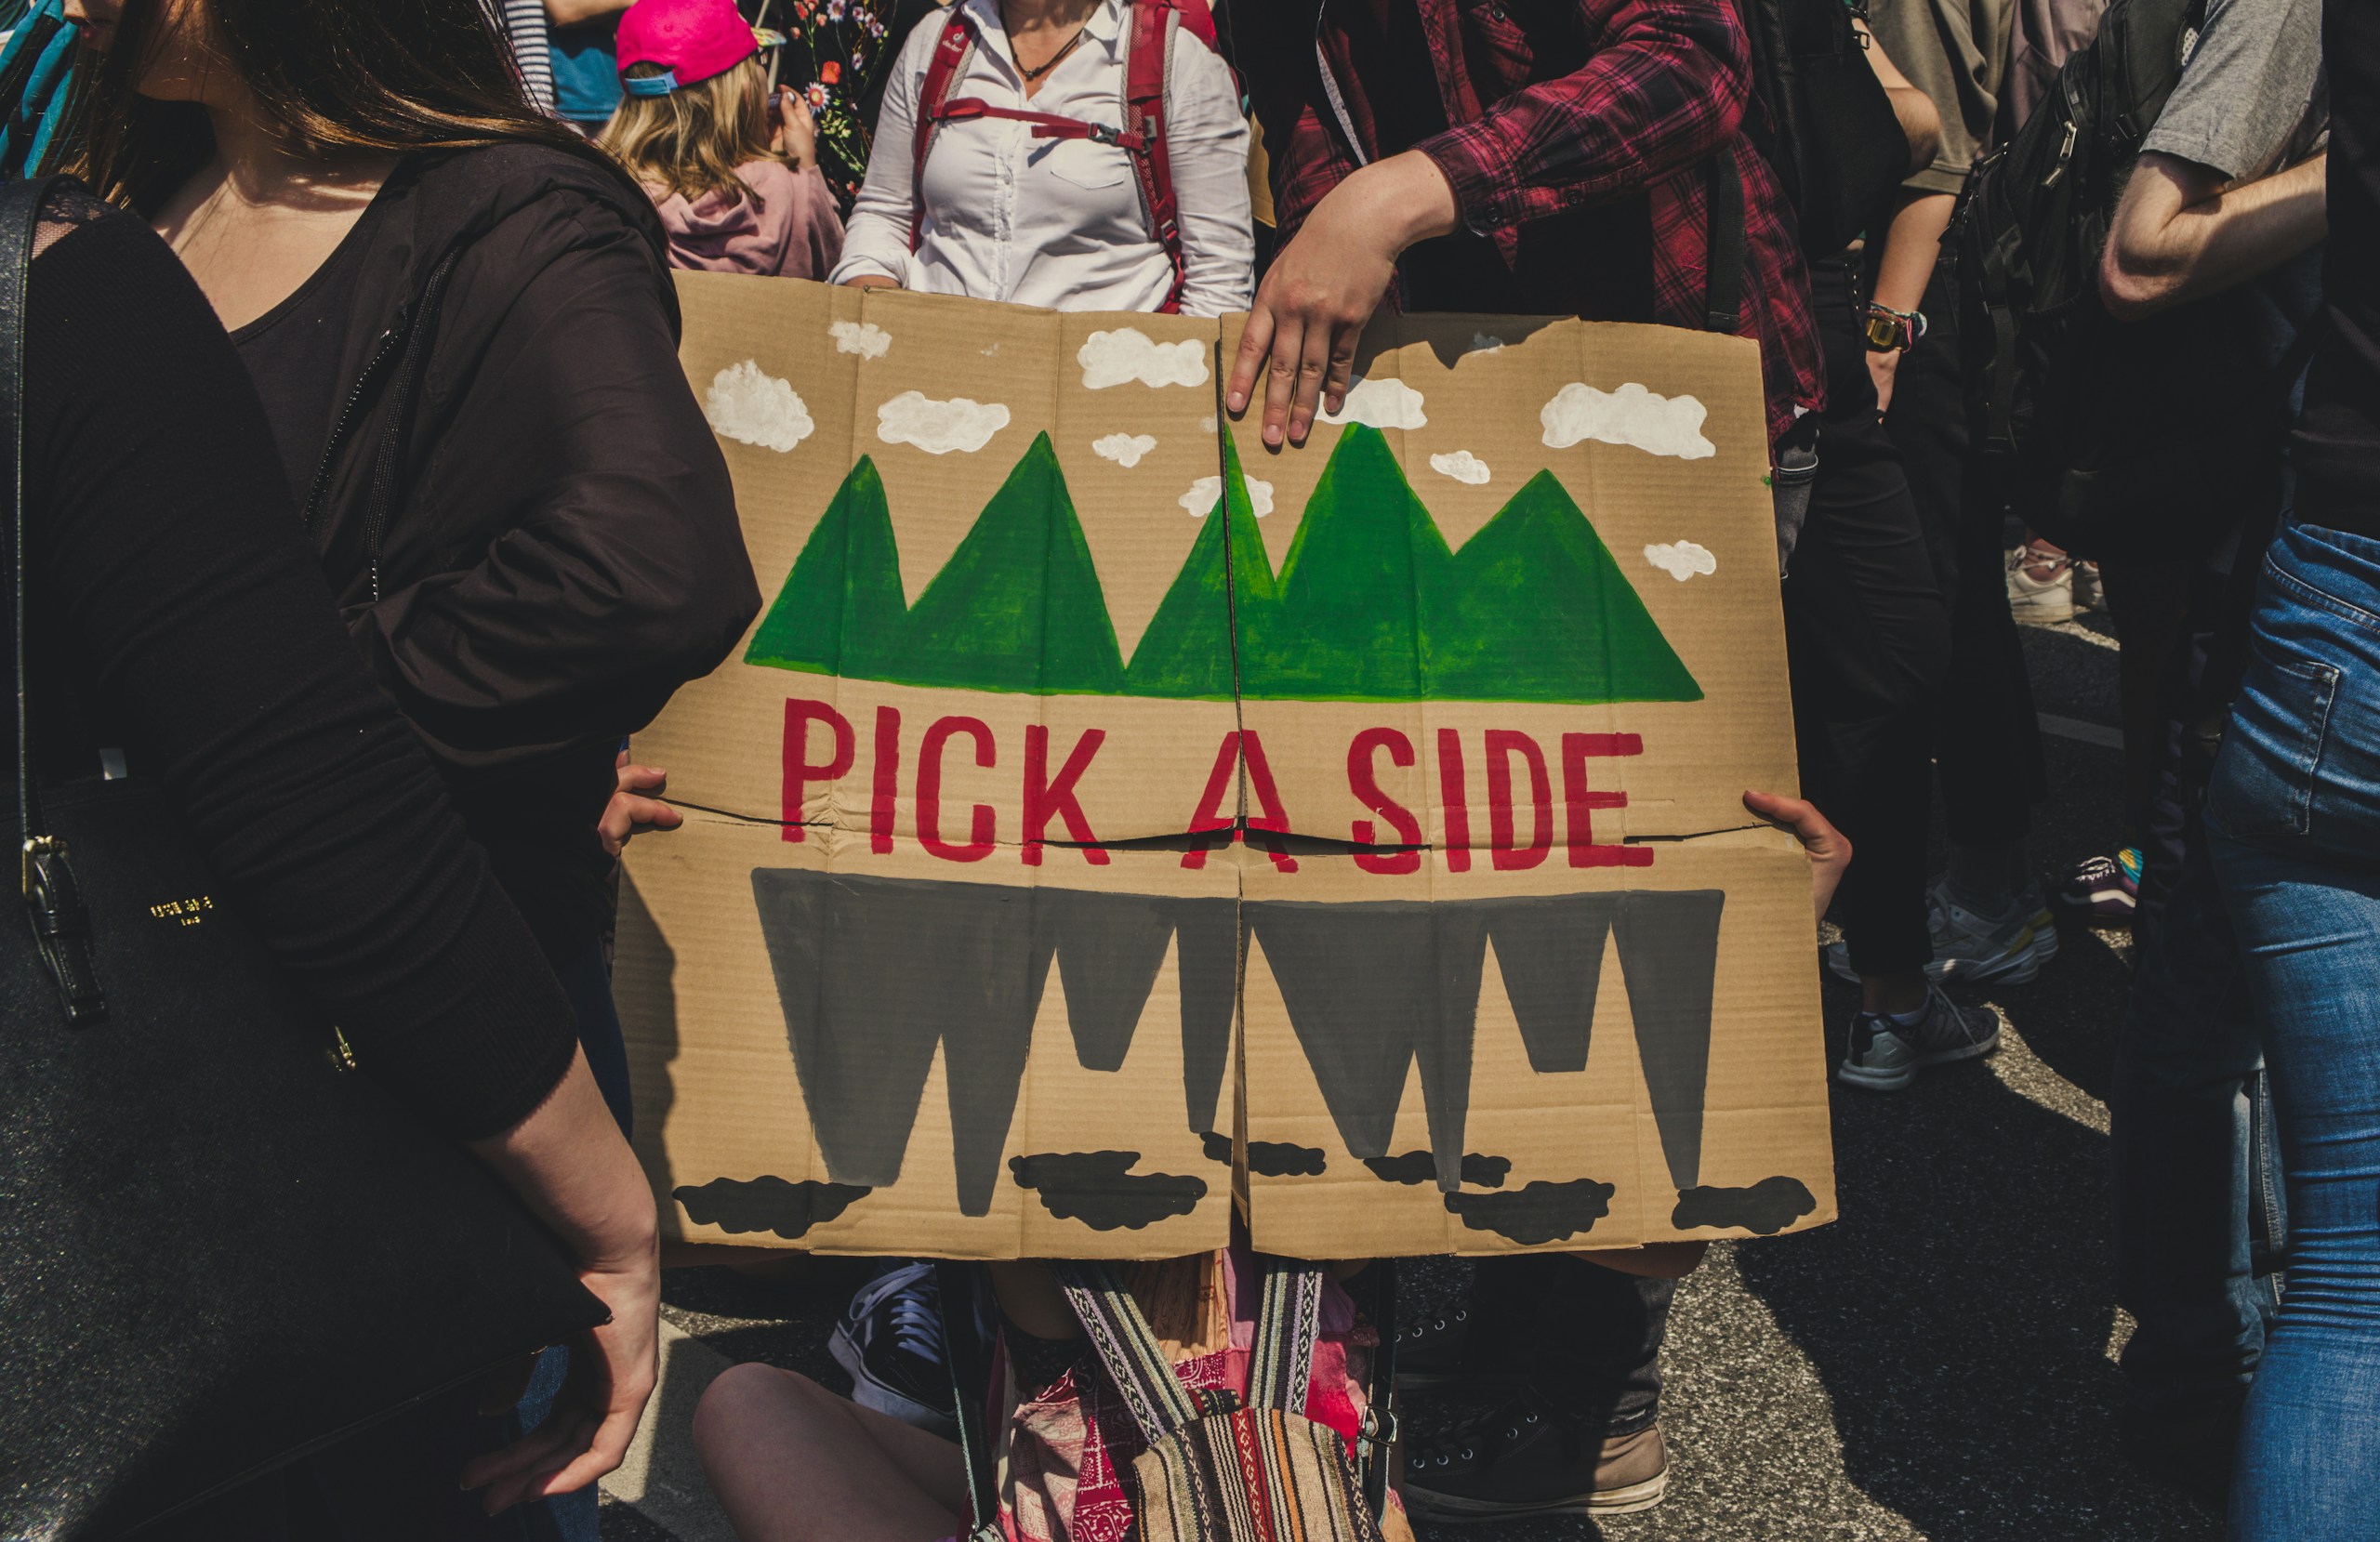 people protesting with sign "pick a side"